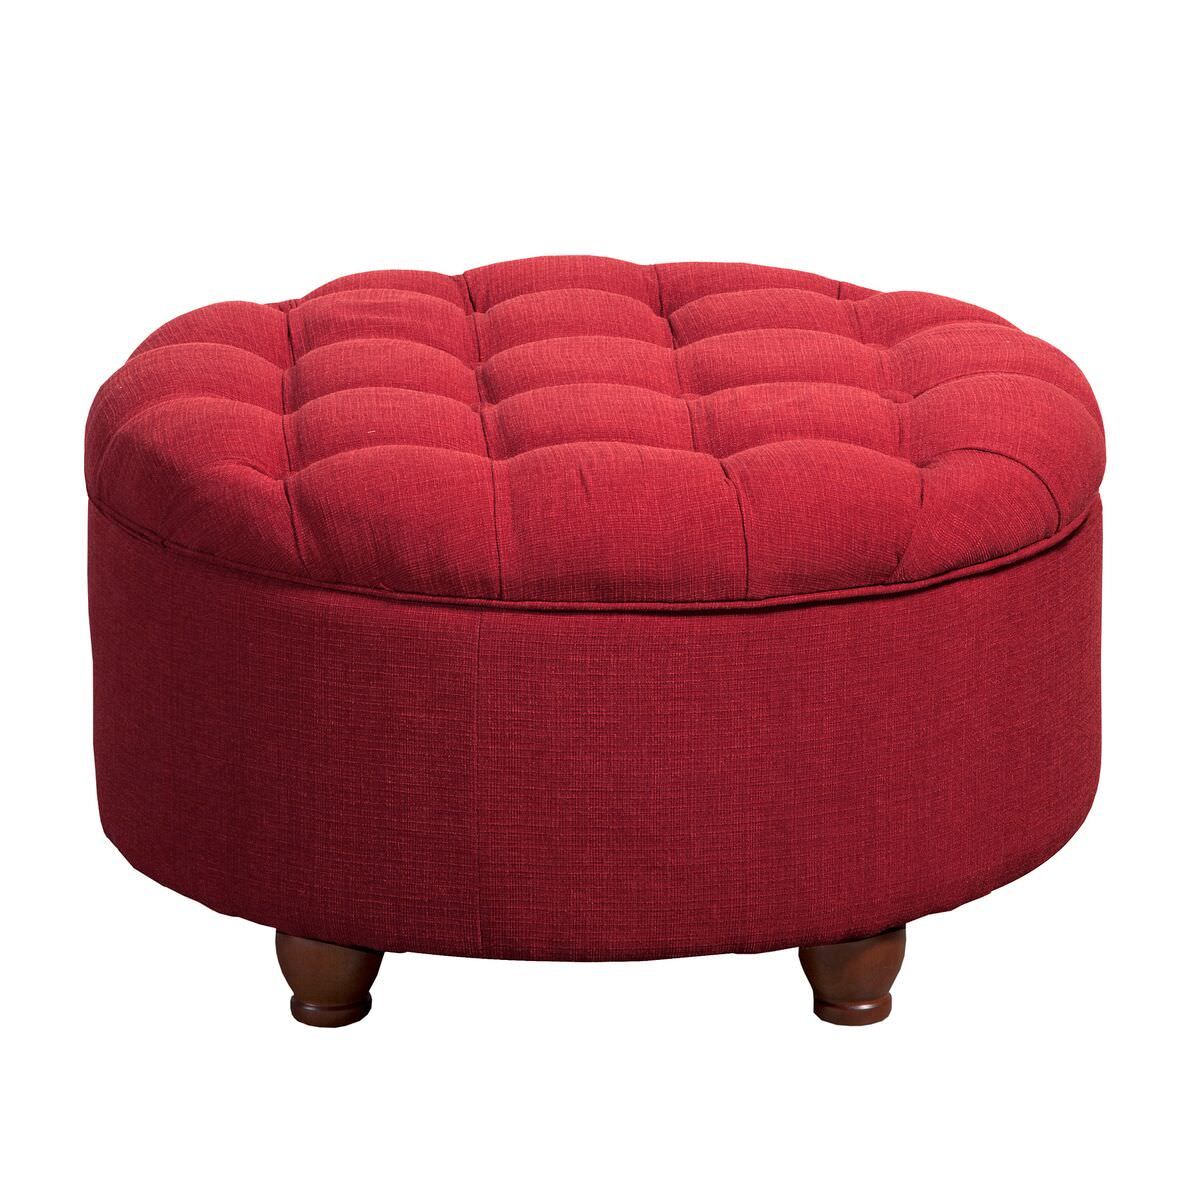 Homepop Tufted Round Cocktail Storage Ottoman, Red Textured Fabric Within Fabric Tufted Storage Ottomans (View 16 of 20)